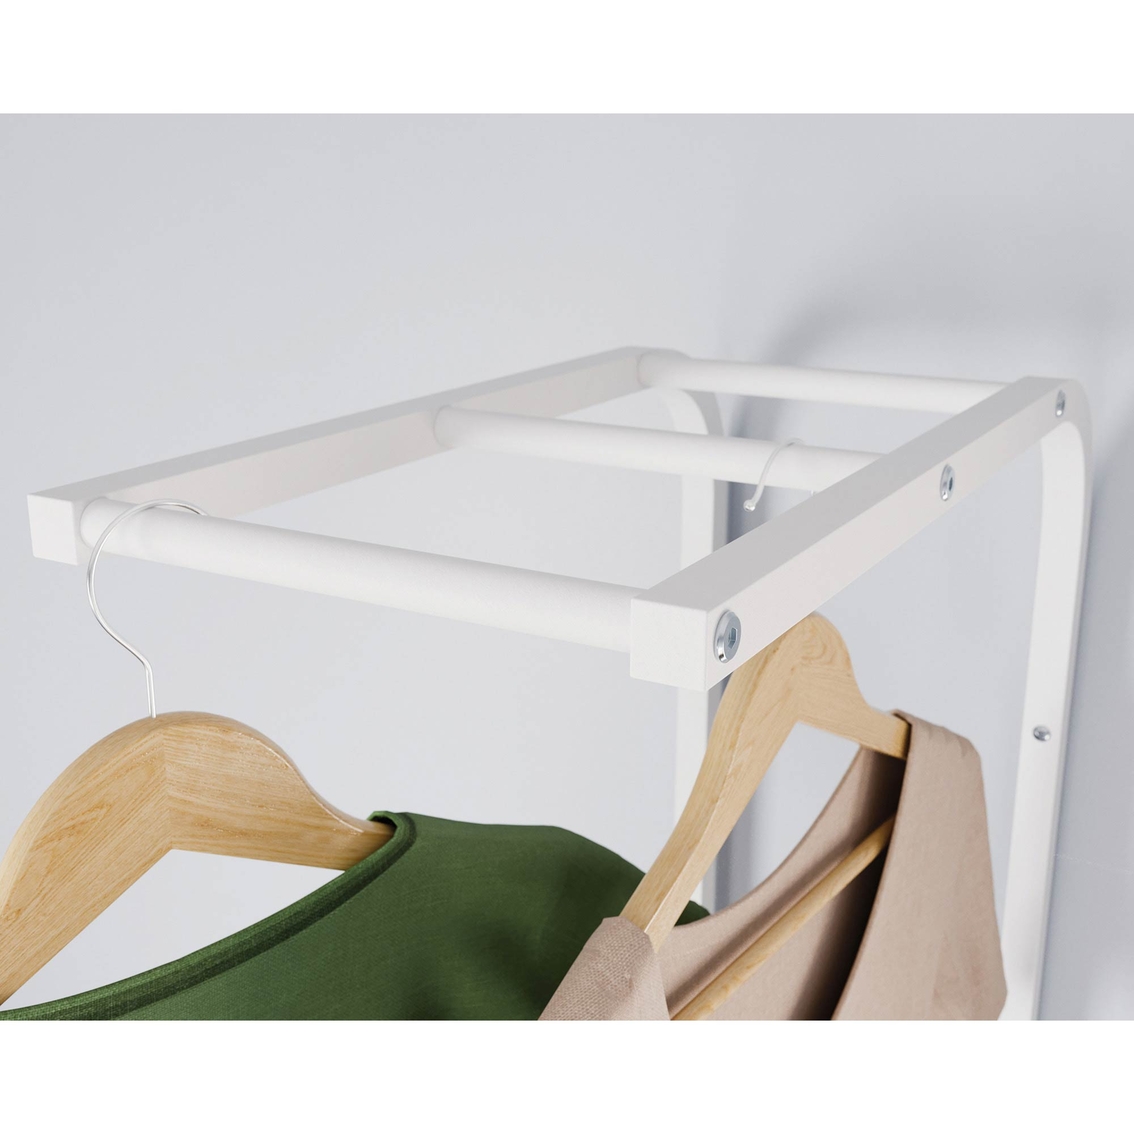 Sauder North Avenue Compact White Laundry Stand and Drying Rack - Image 4 of 5